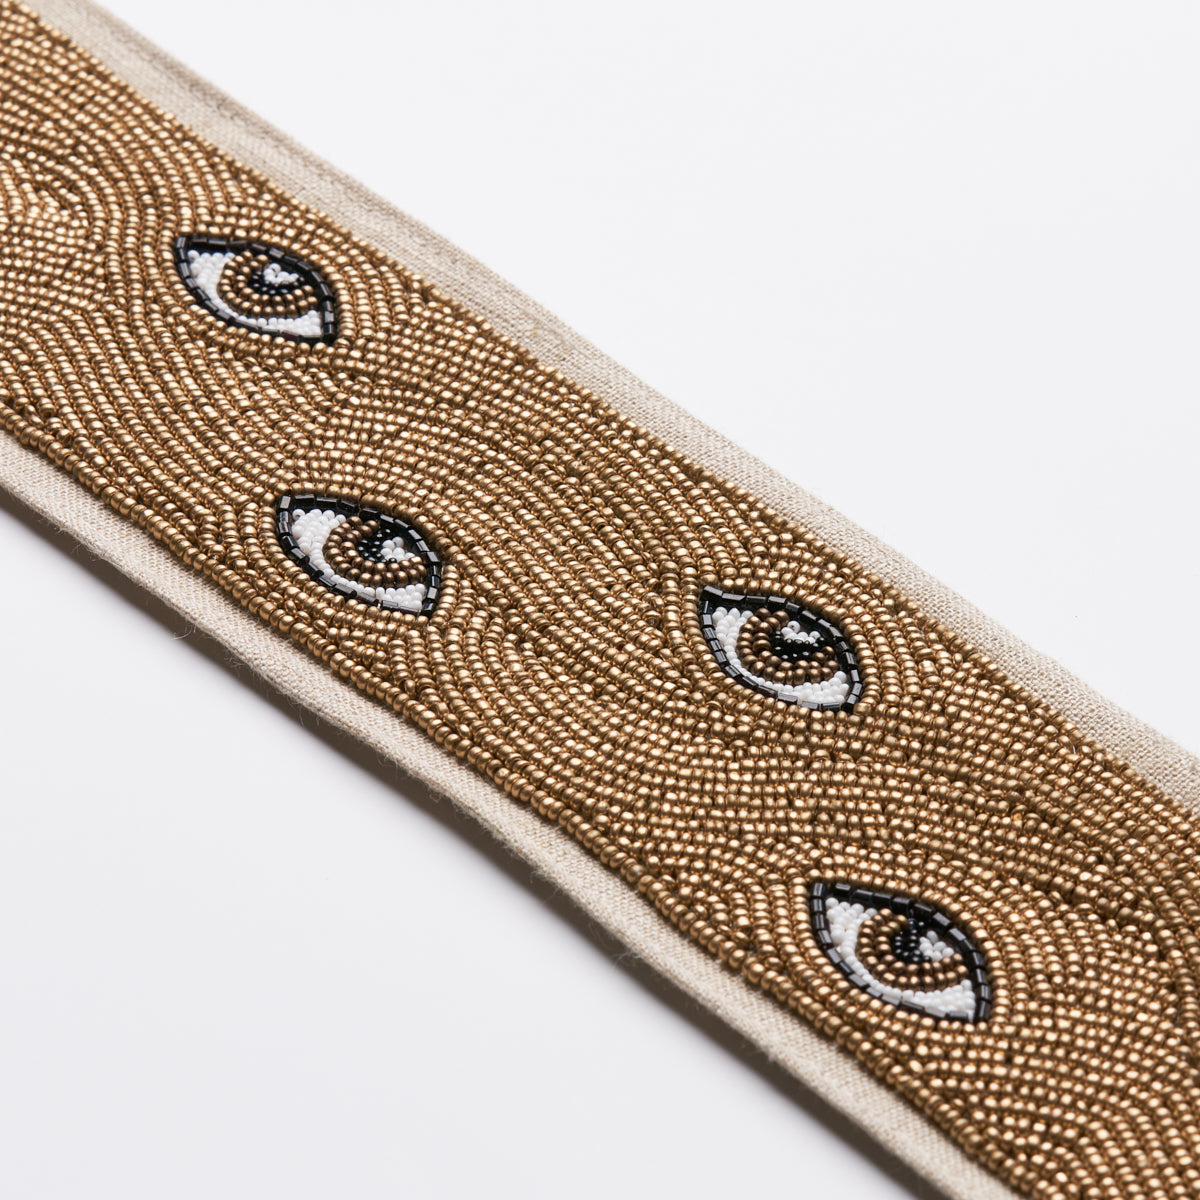 MIND'S EYE BEADED TAPE | BROWN & GOLD